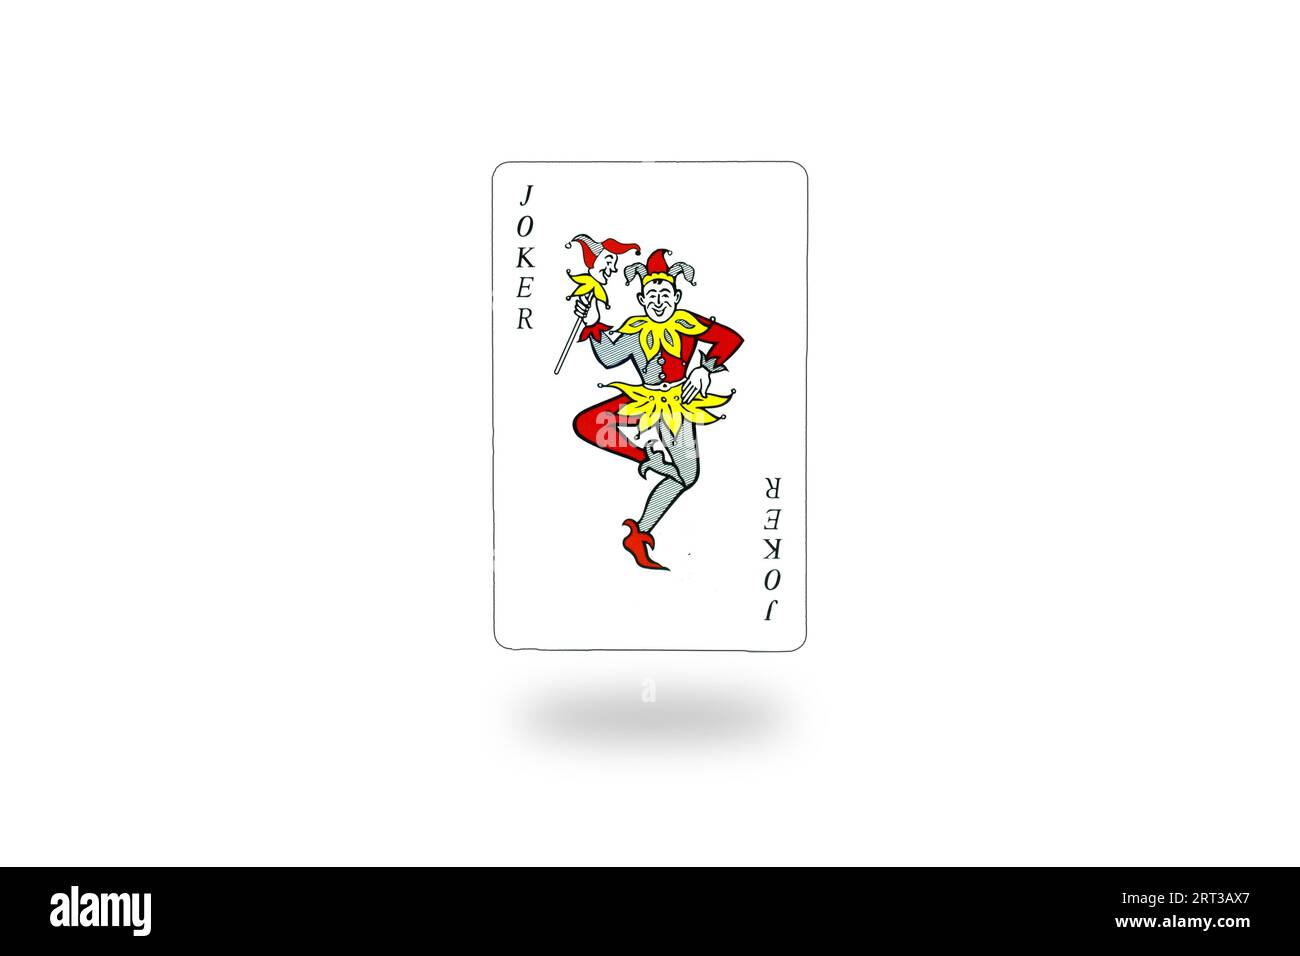 Joker playing card stock photo in white background Stock Photo